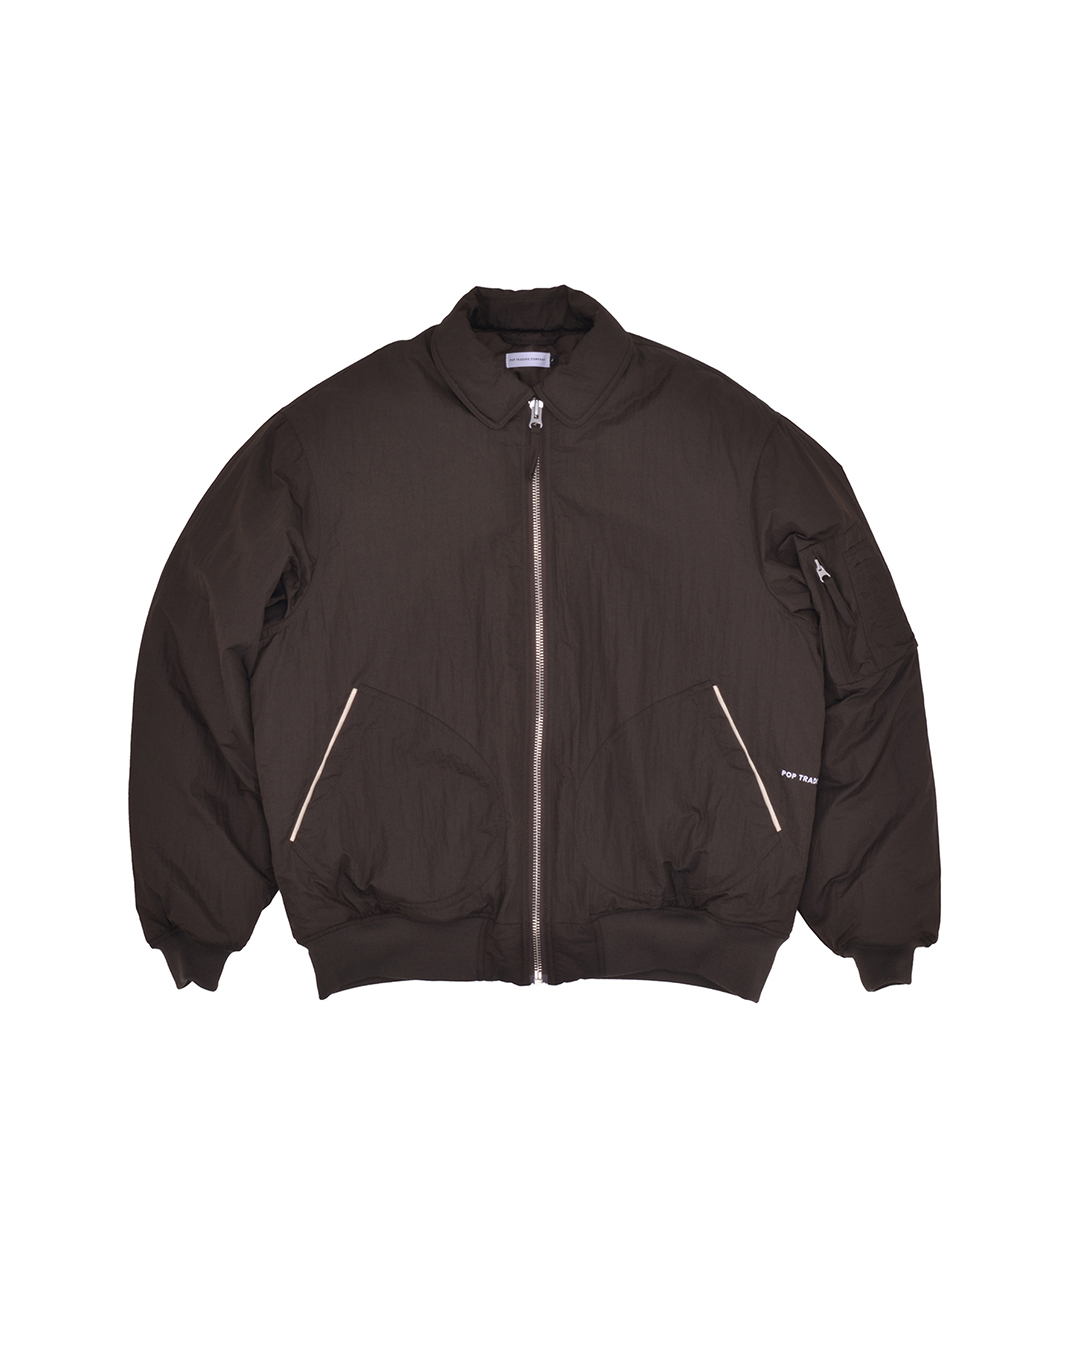 Pop Trading Company AW23 Collection Drop 2 - Pop Trading Company